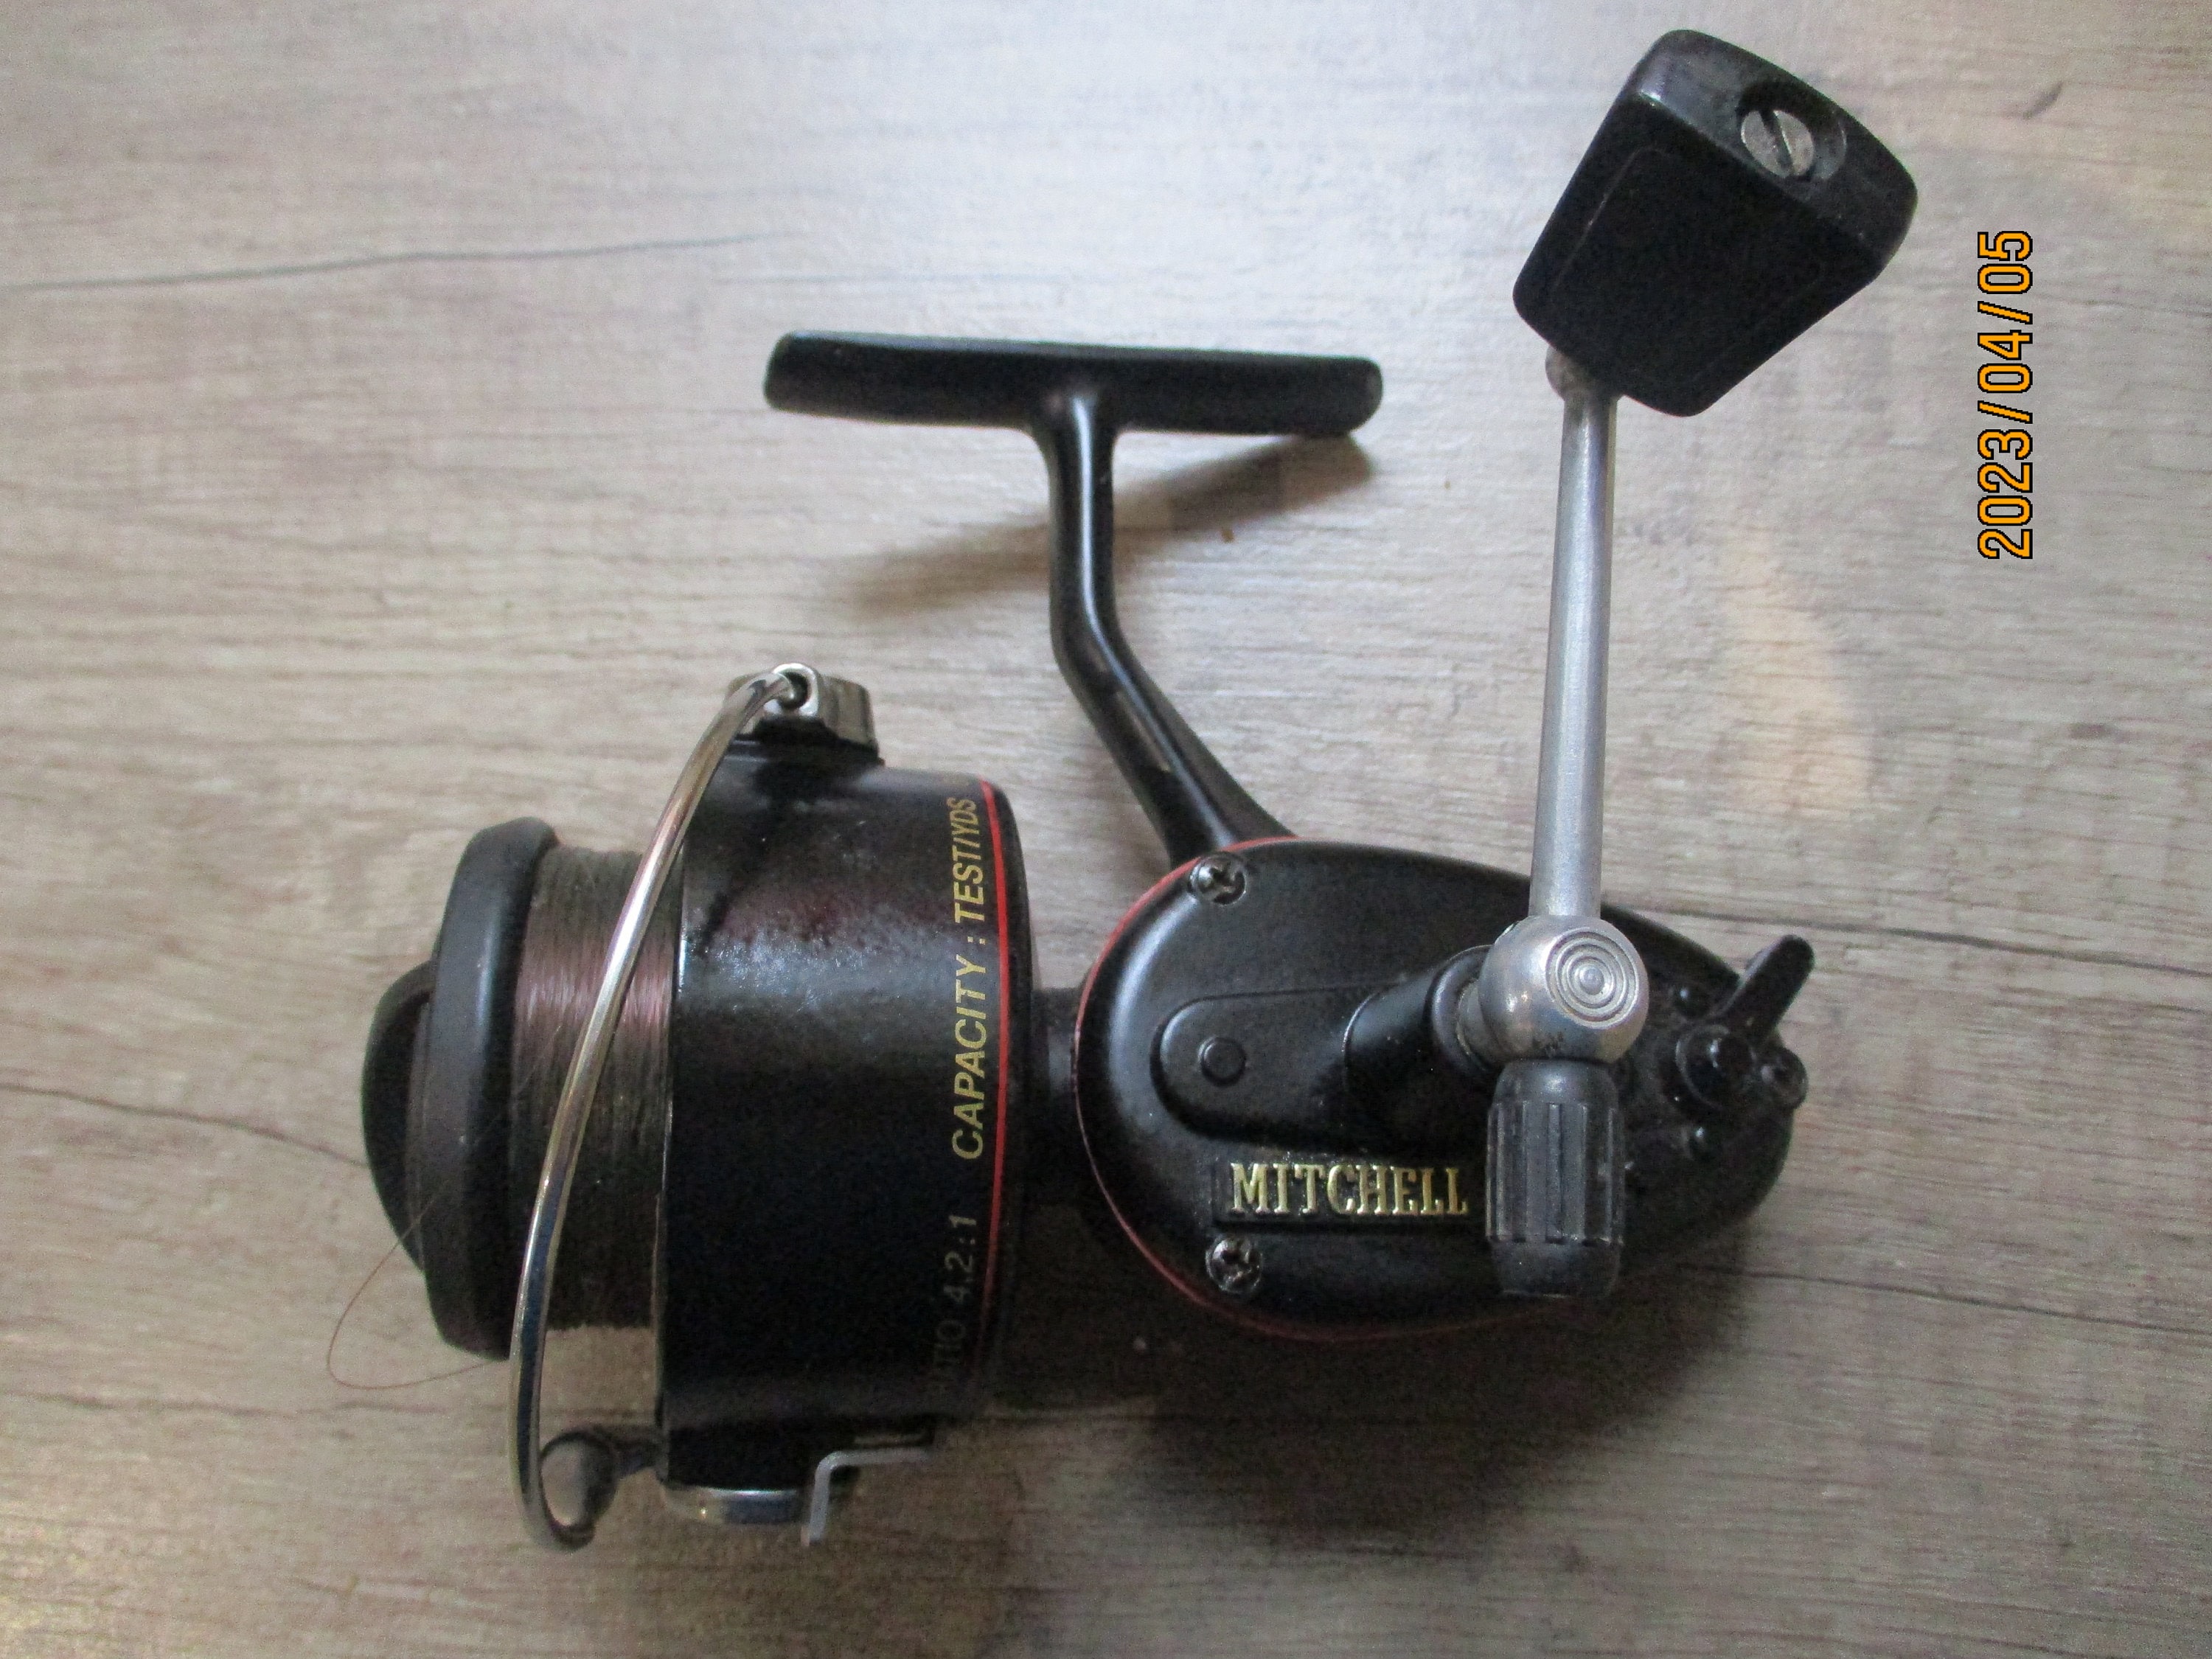 A Good Vintage Mitchell 300 Reel Made in Taiwan Post 1990 